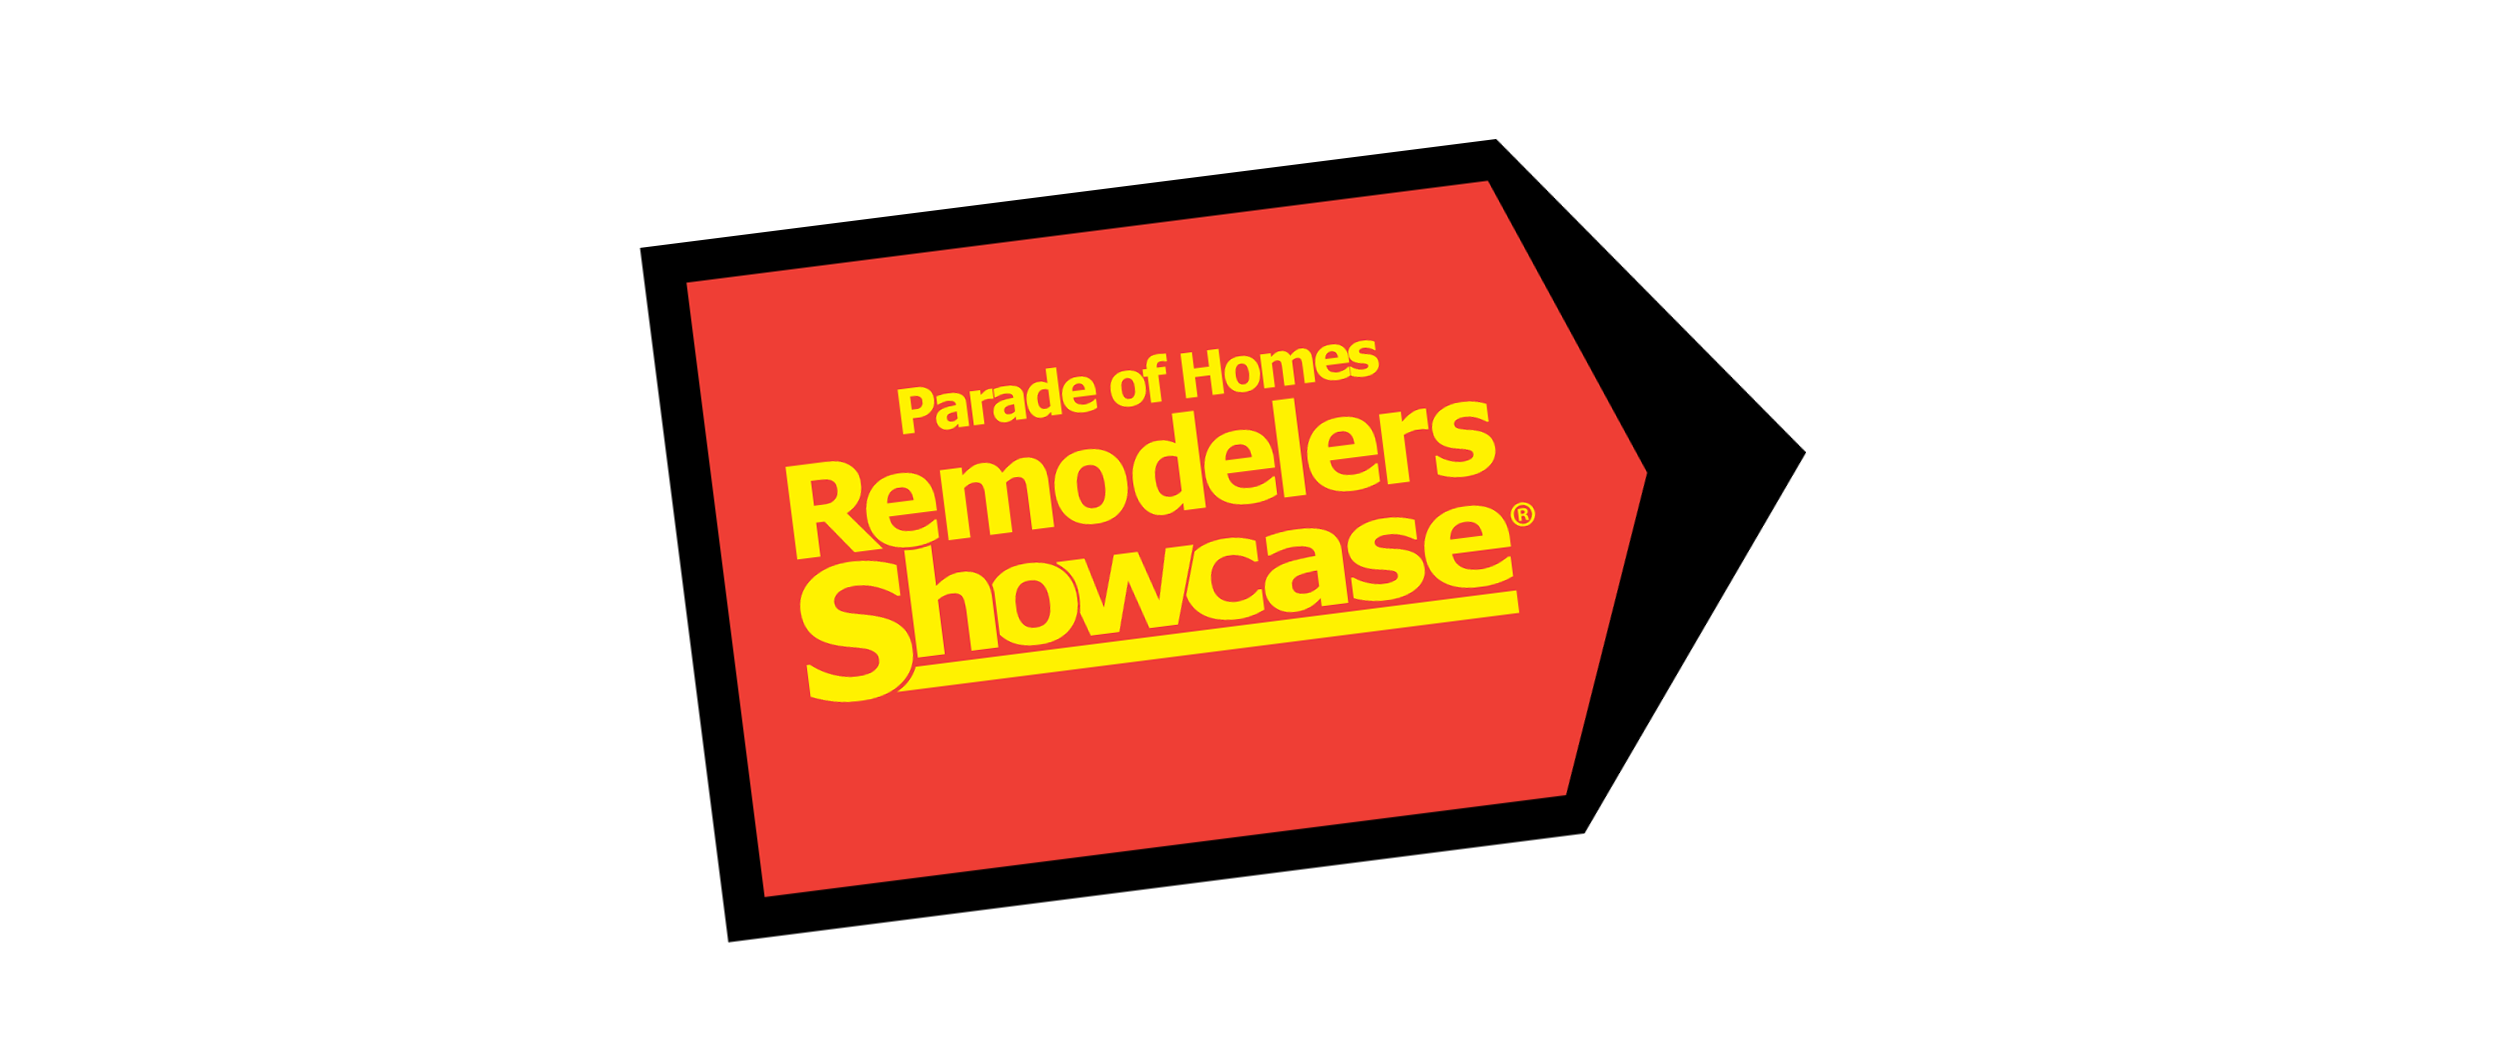 Image for Facts About the 2023 Spring Parade of Homes Remodelers Showcase®